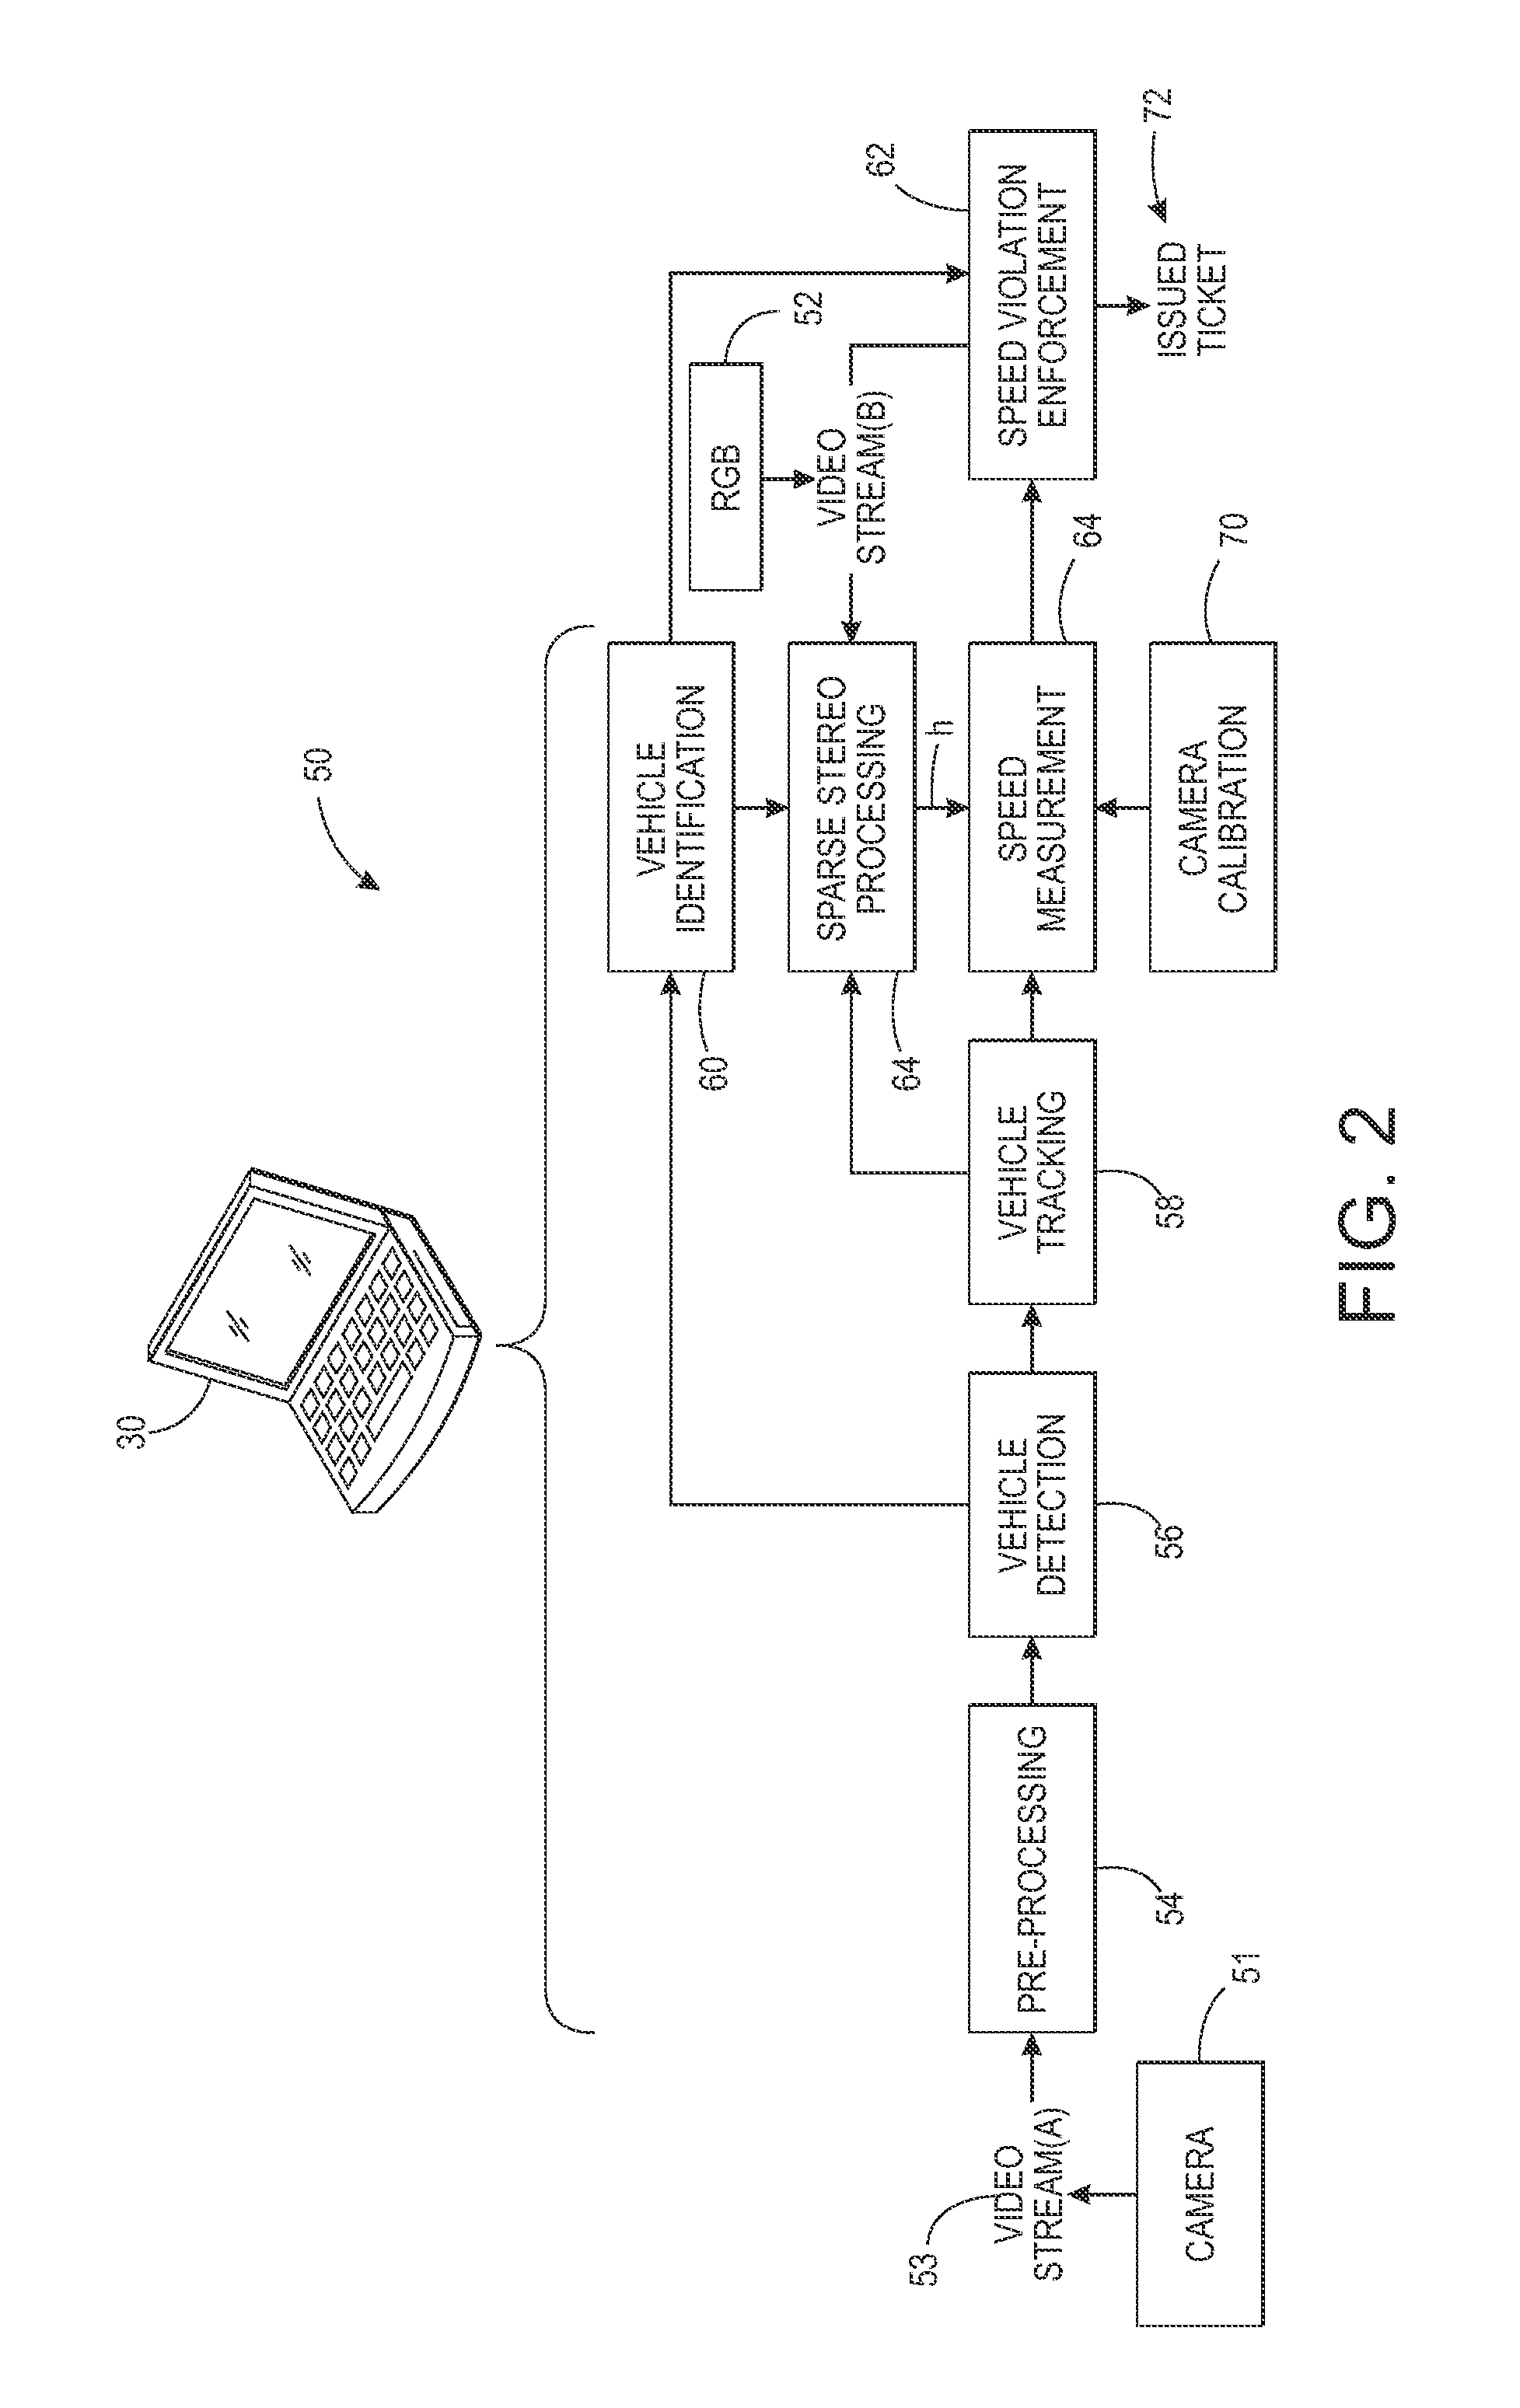 Single camera video-based speed enforcement system with a secondary auxiliary RGB traffic camera